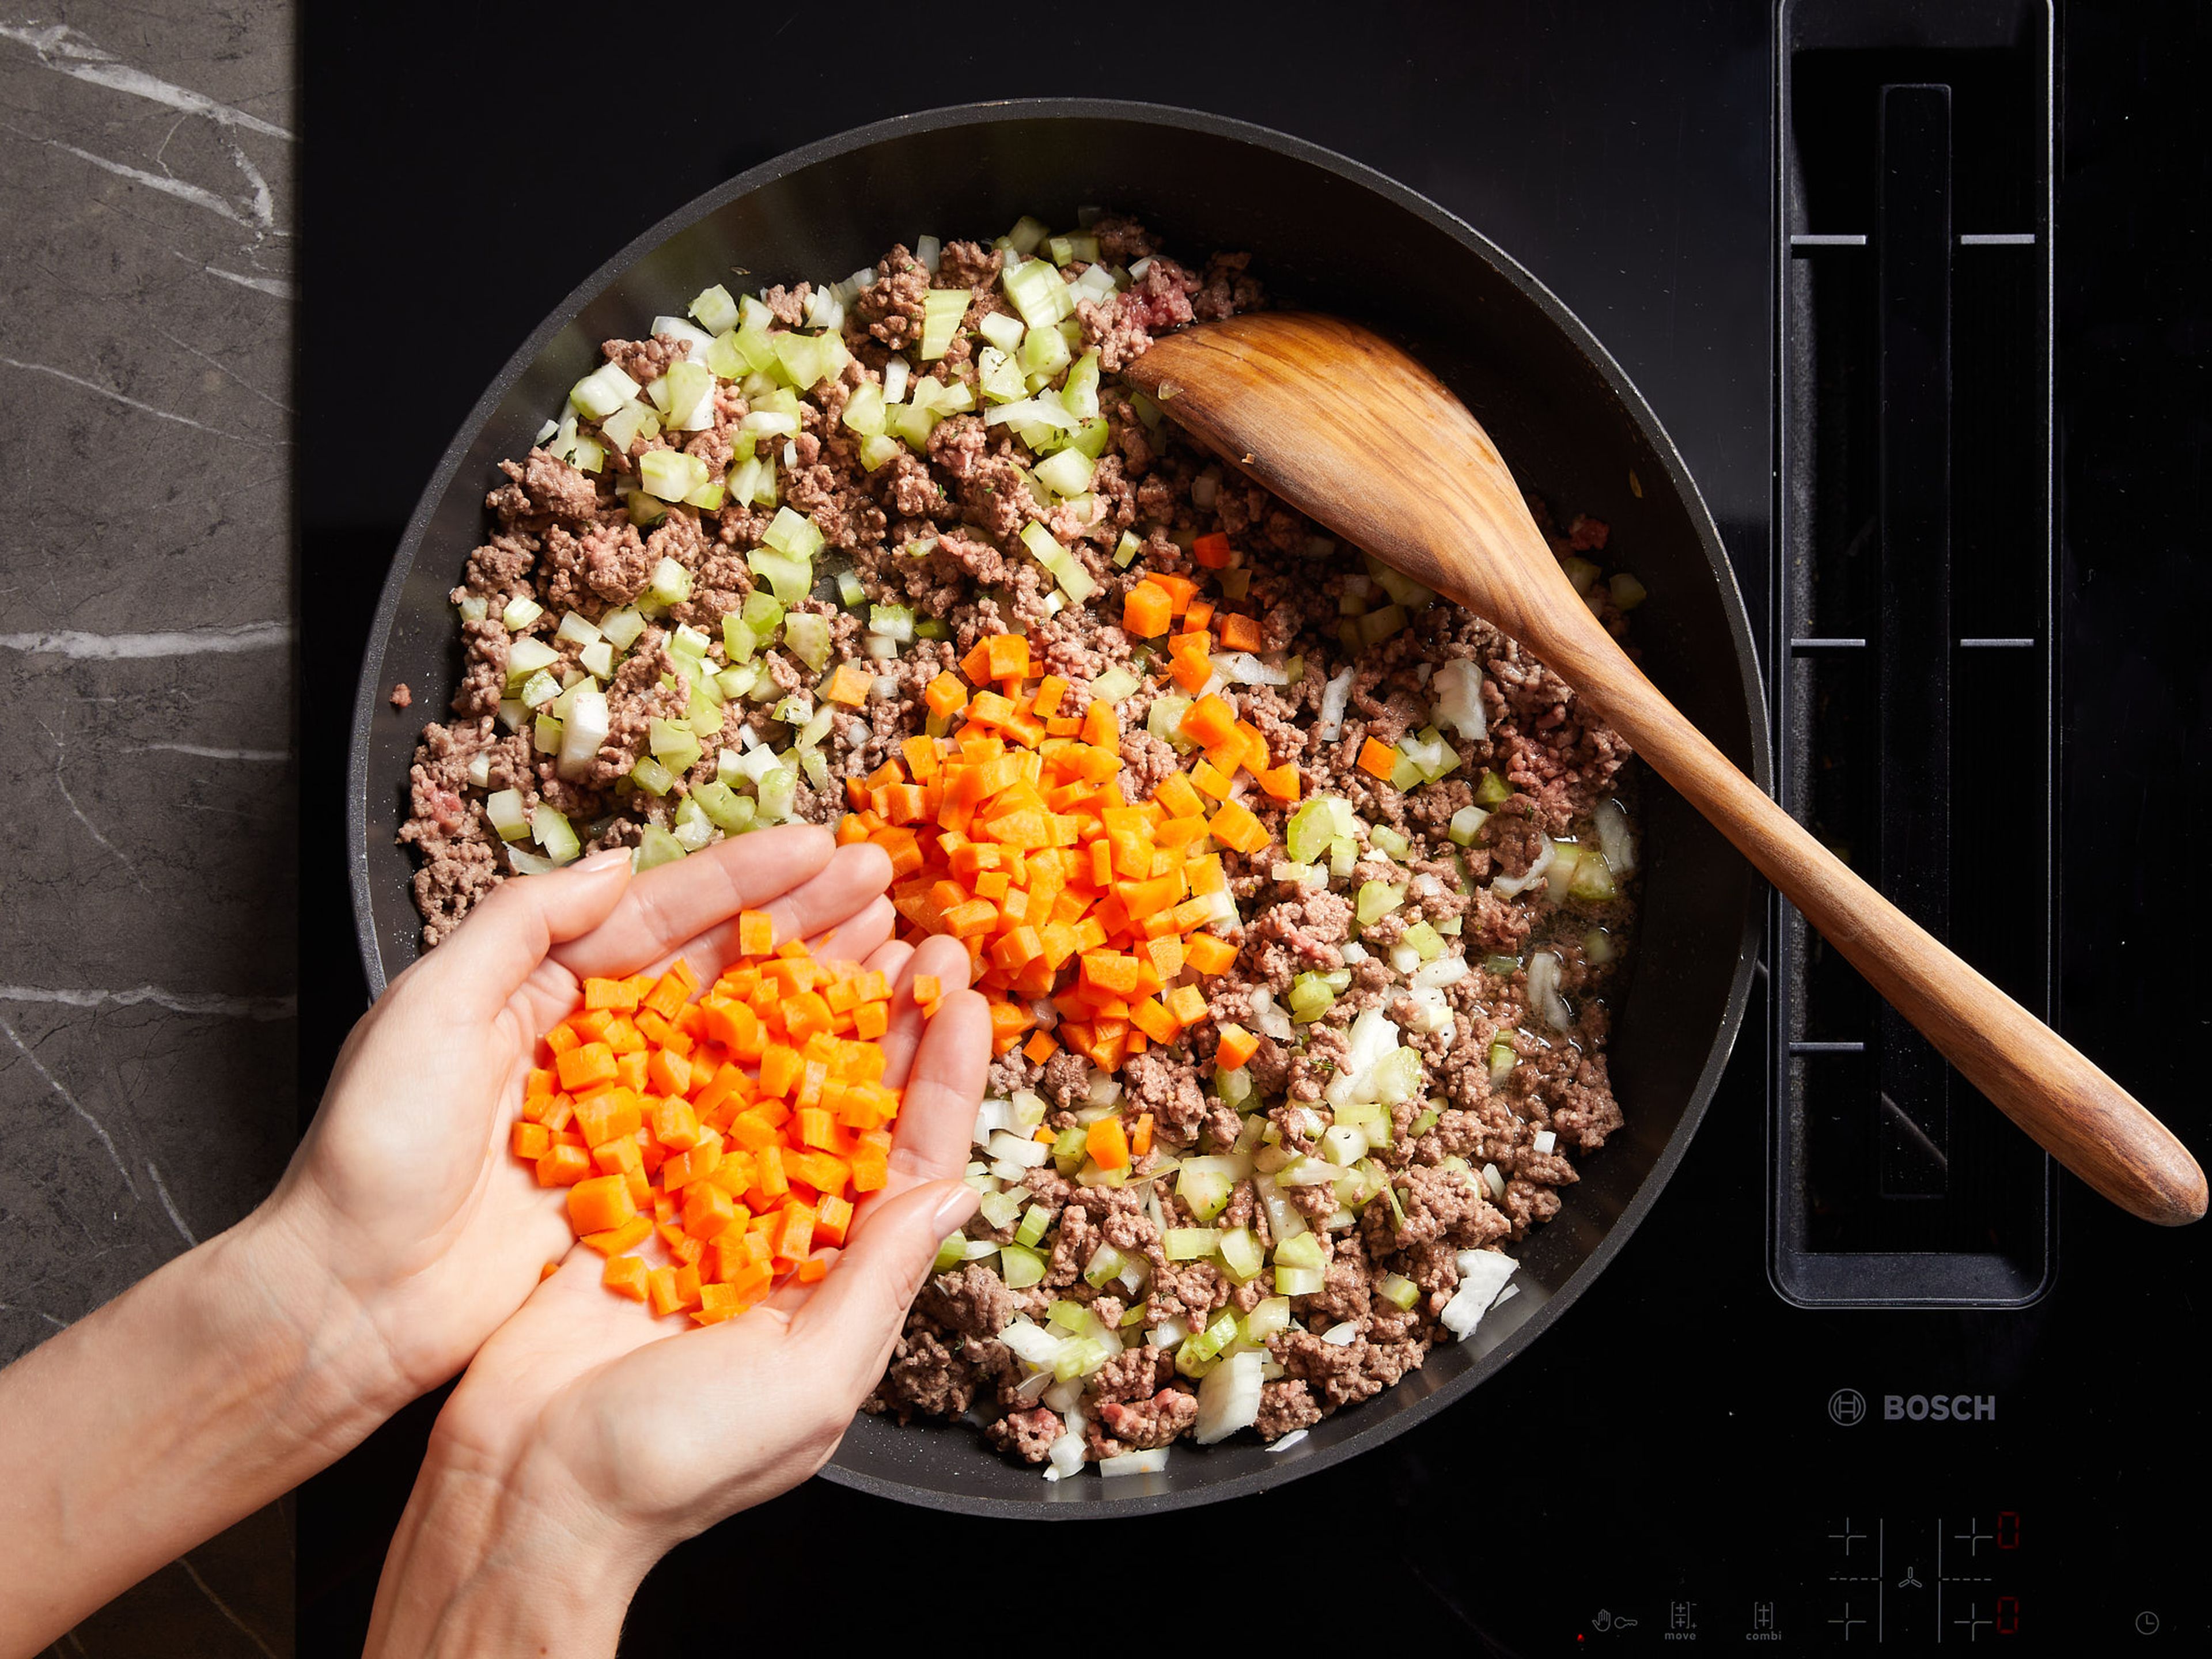 Heat some oil in a large pan and fry the ground lamb until it’s browned, approx. 2–3 min. Add onion, garlic, thyme, celery and carrot, sauté for approx. 5–8 more min. Season generously with salt and pepper.